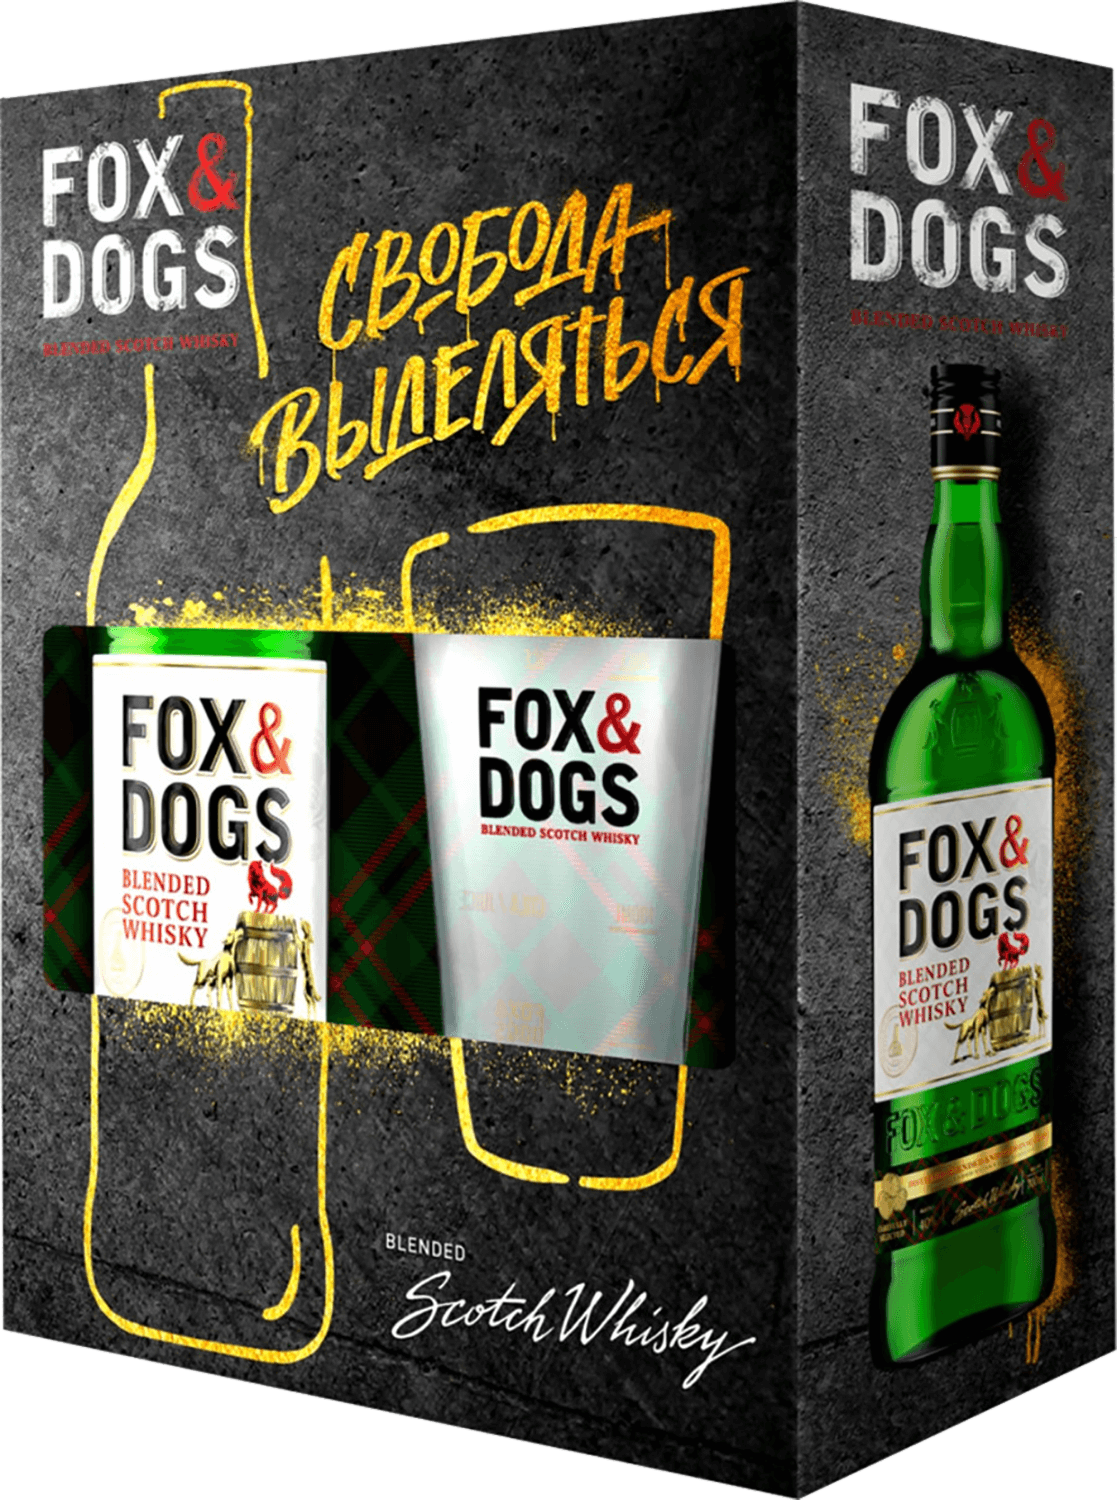 Fox and Dogs Blended Scotch Whisky (gift box with a glass) wild turkey 101 bourbon gift box with one glass and whisky stones